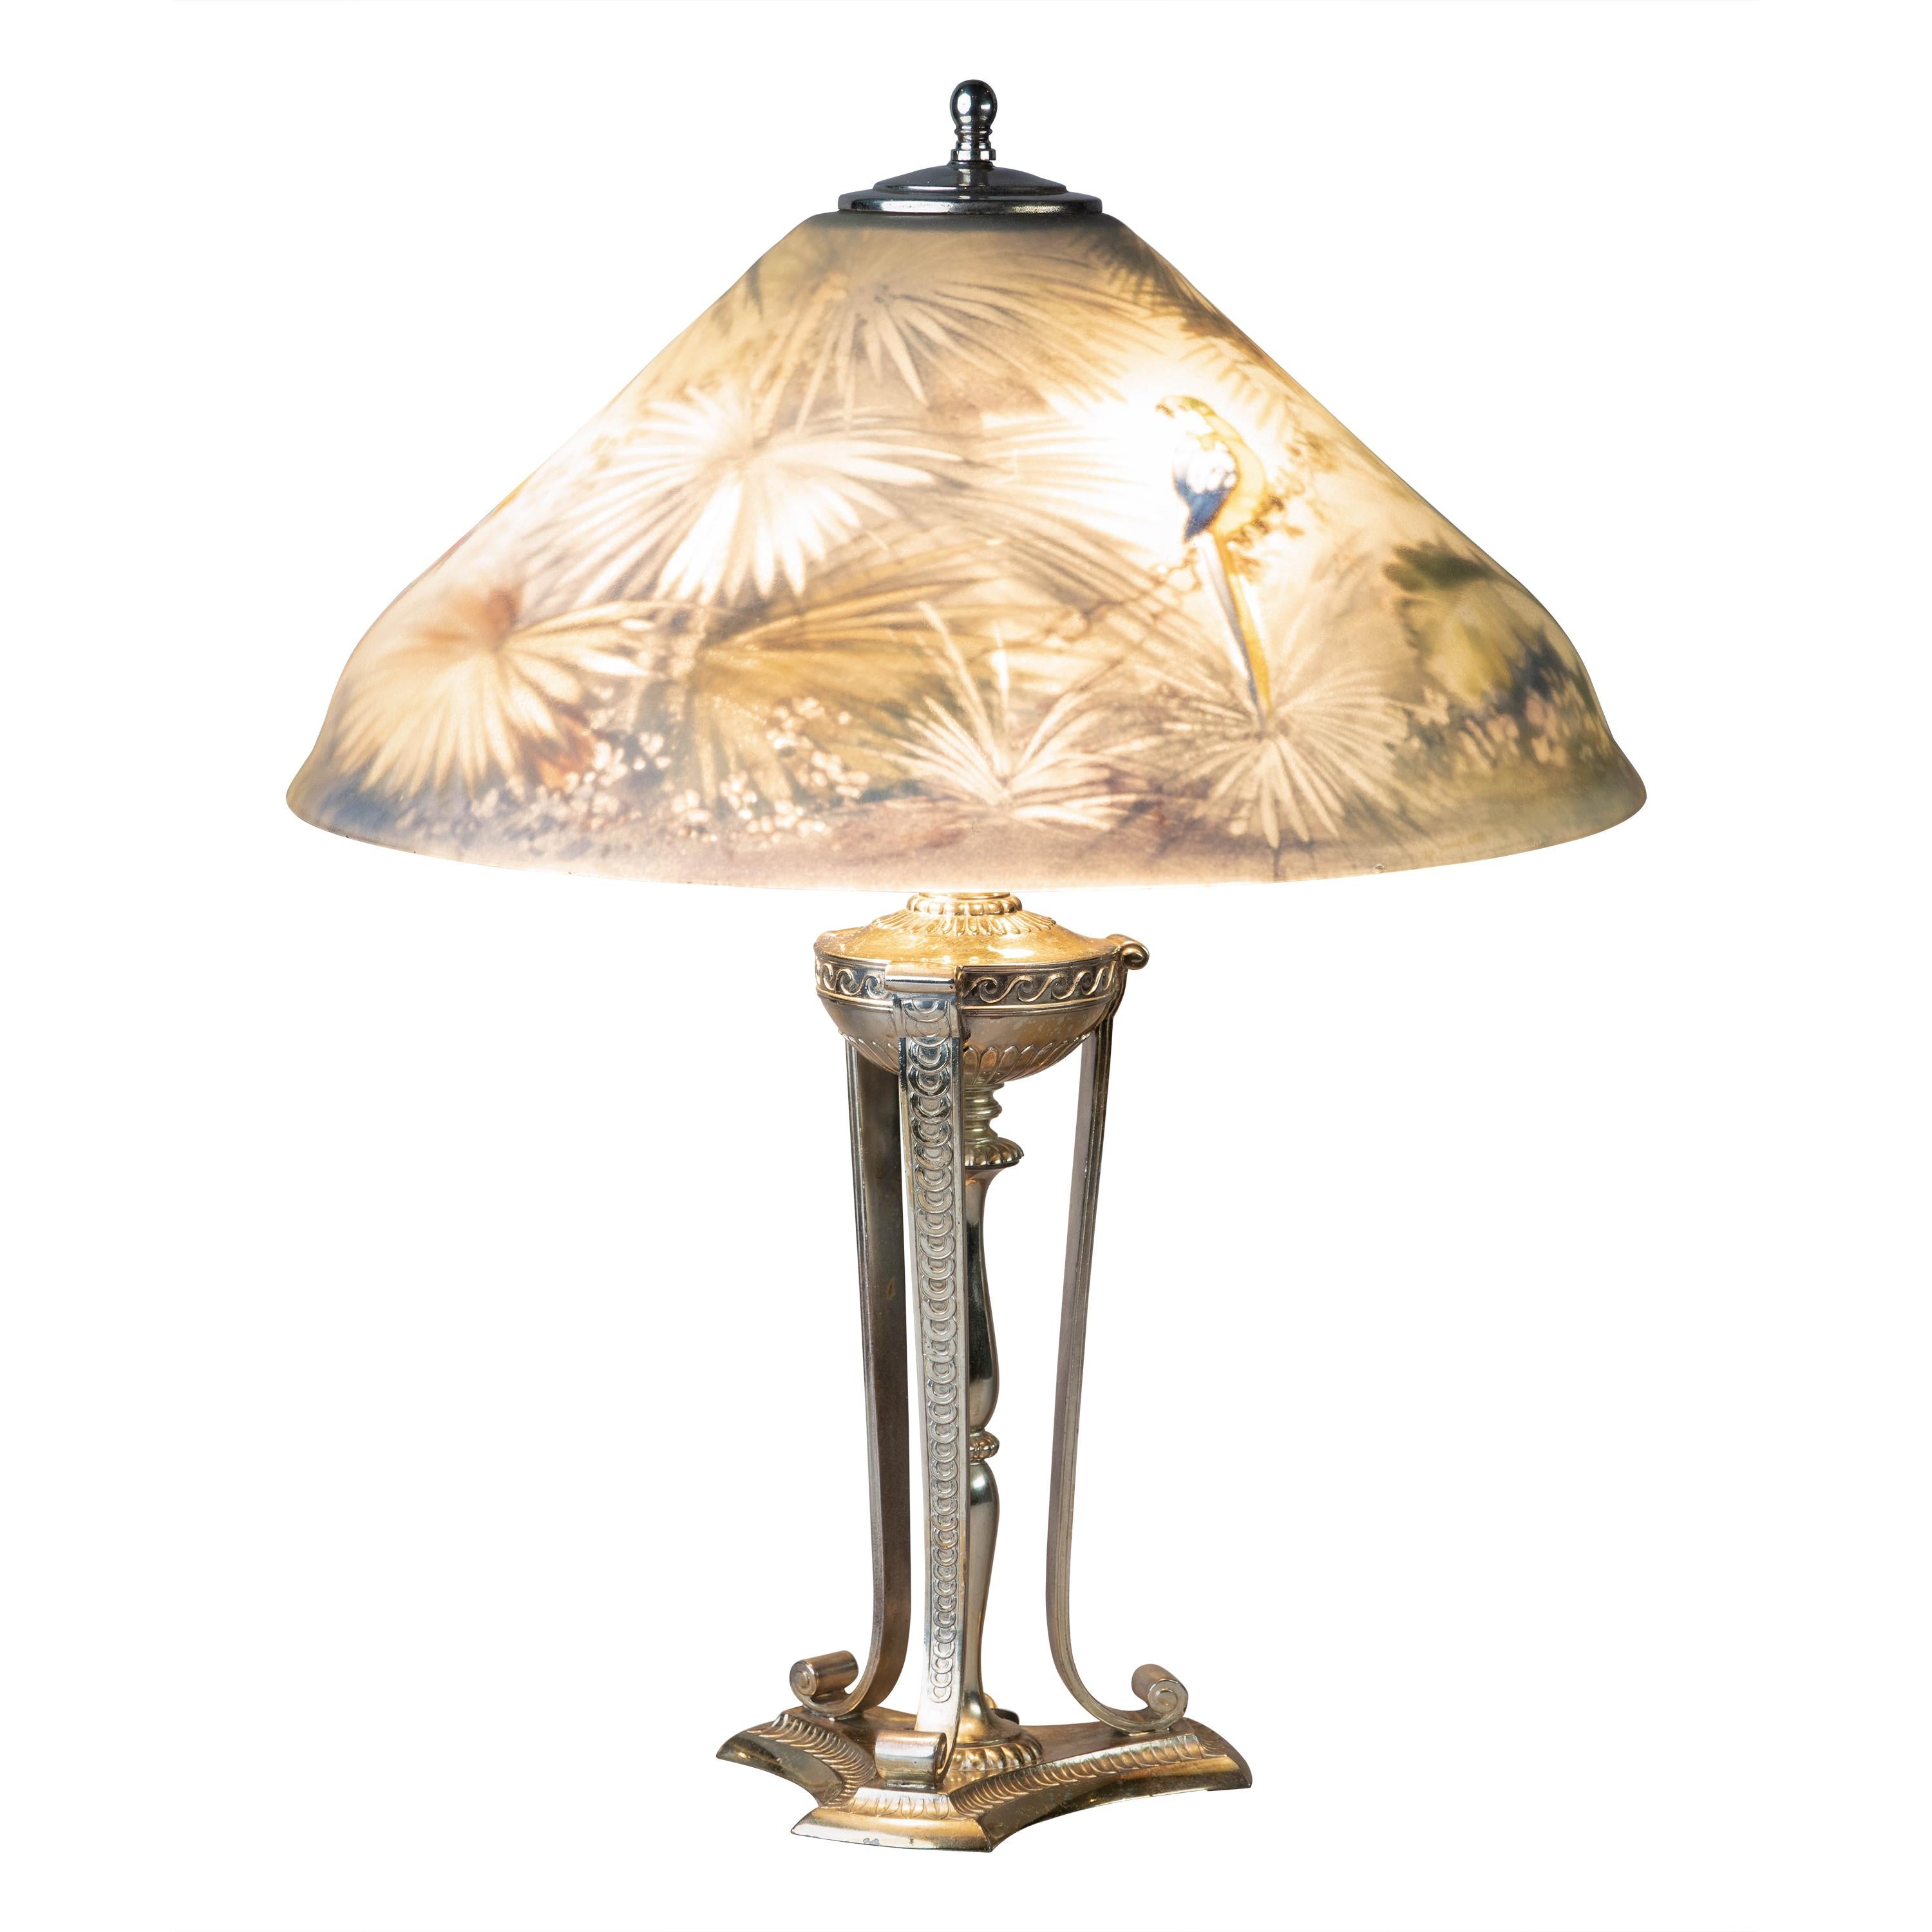 Pairpoint Silver Plated and Reverse Painted Glass Parrot Lamp, 20th Century